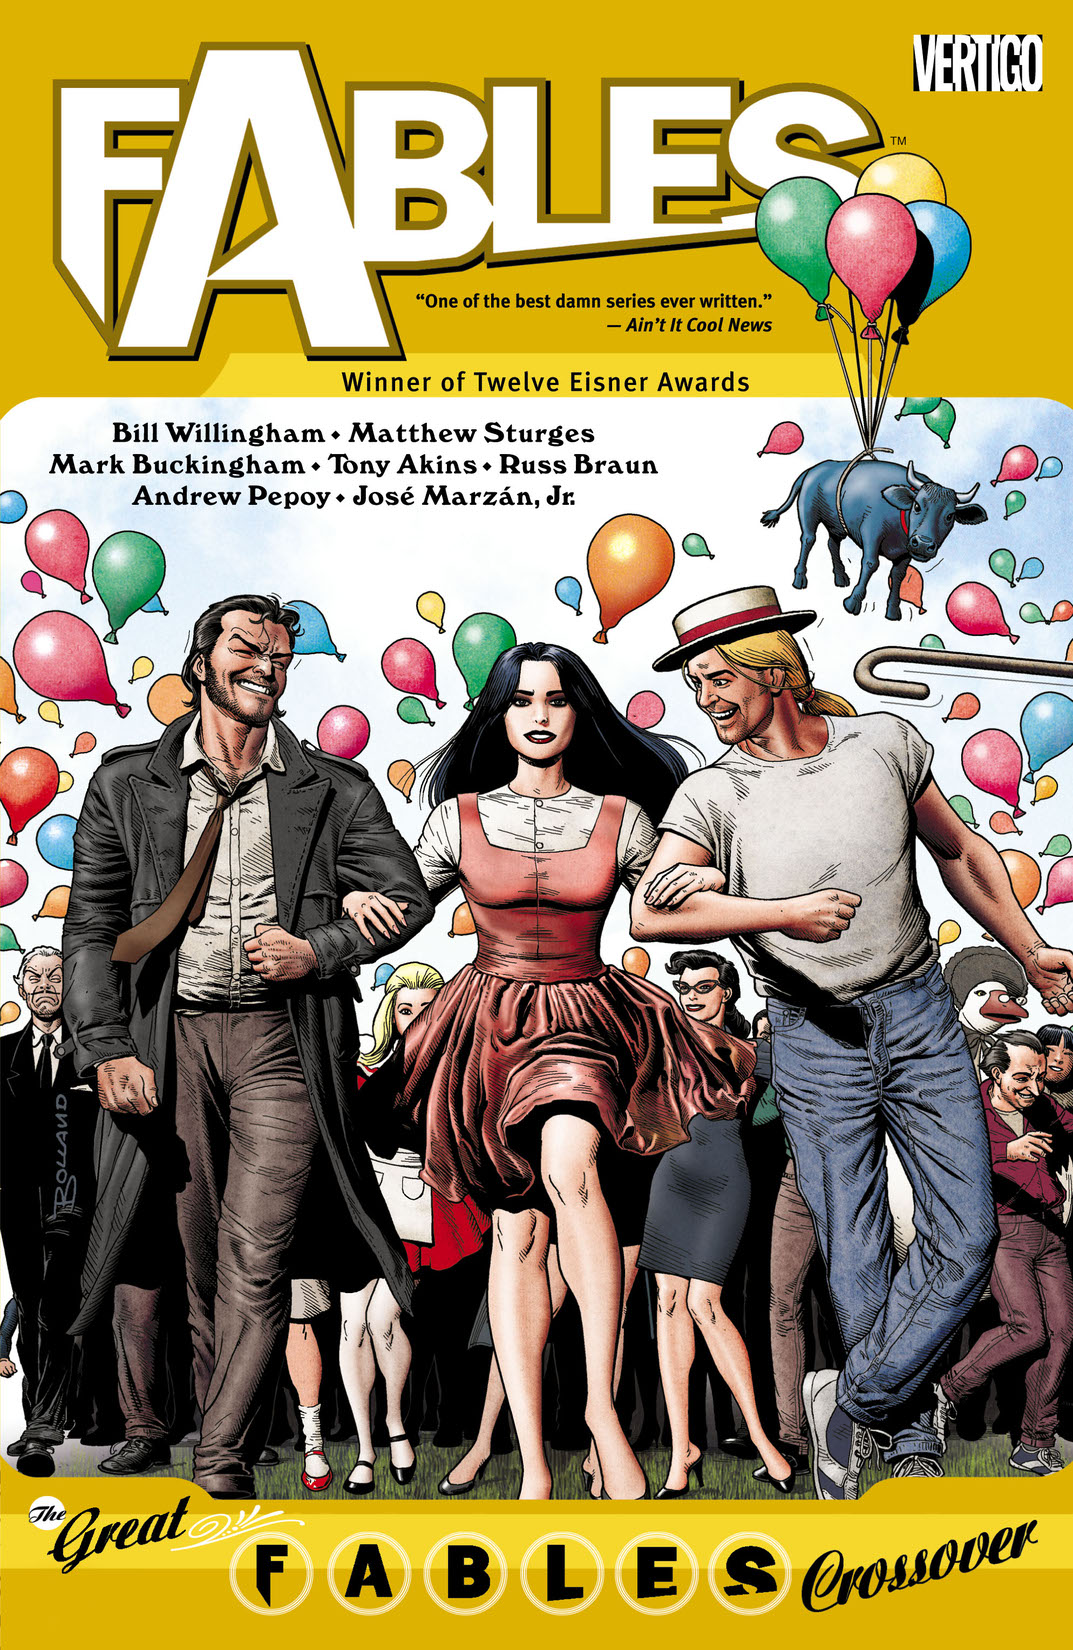 Fables Vol. 13: The Great Fables Crossover preview images